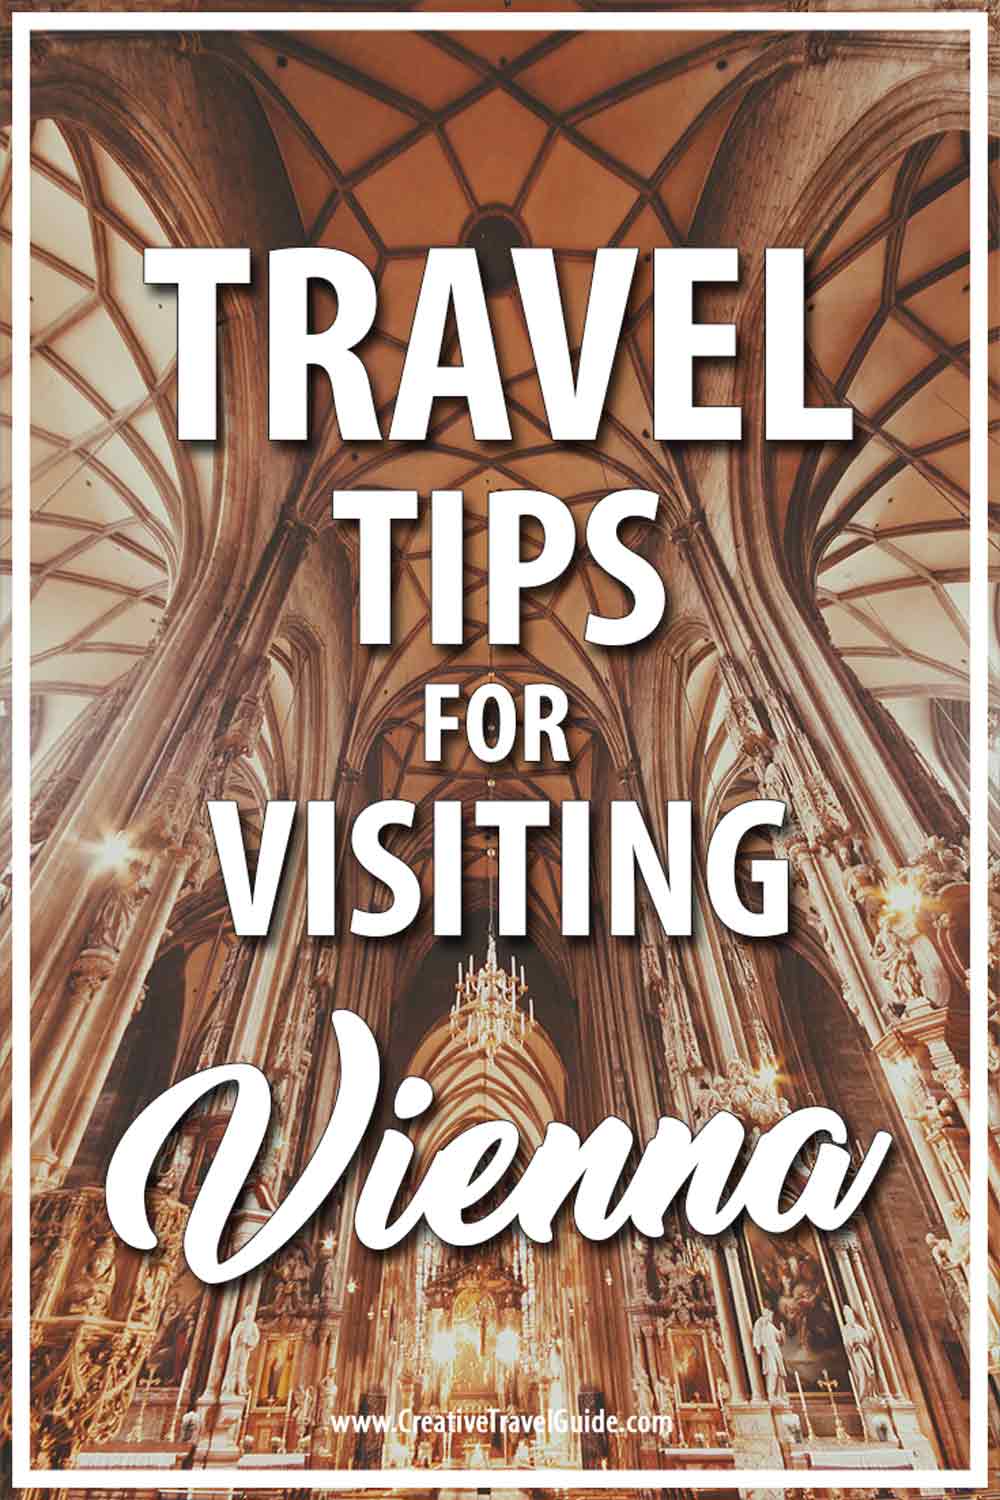 Travel tips for visiting Vienna